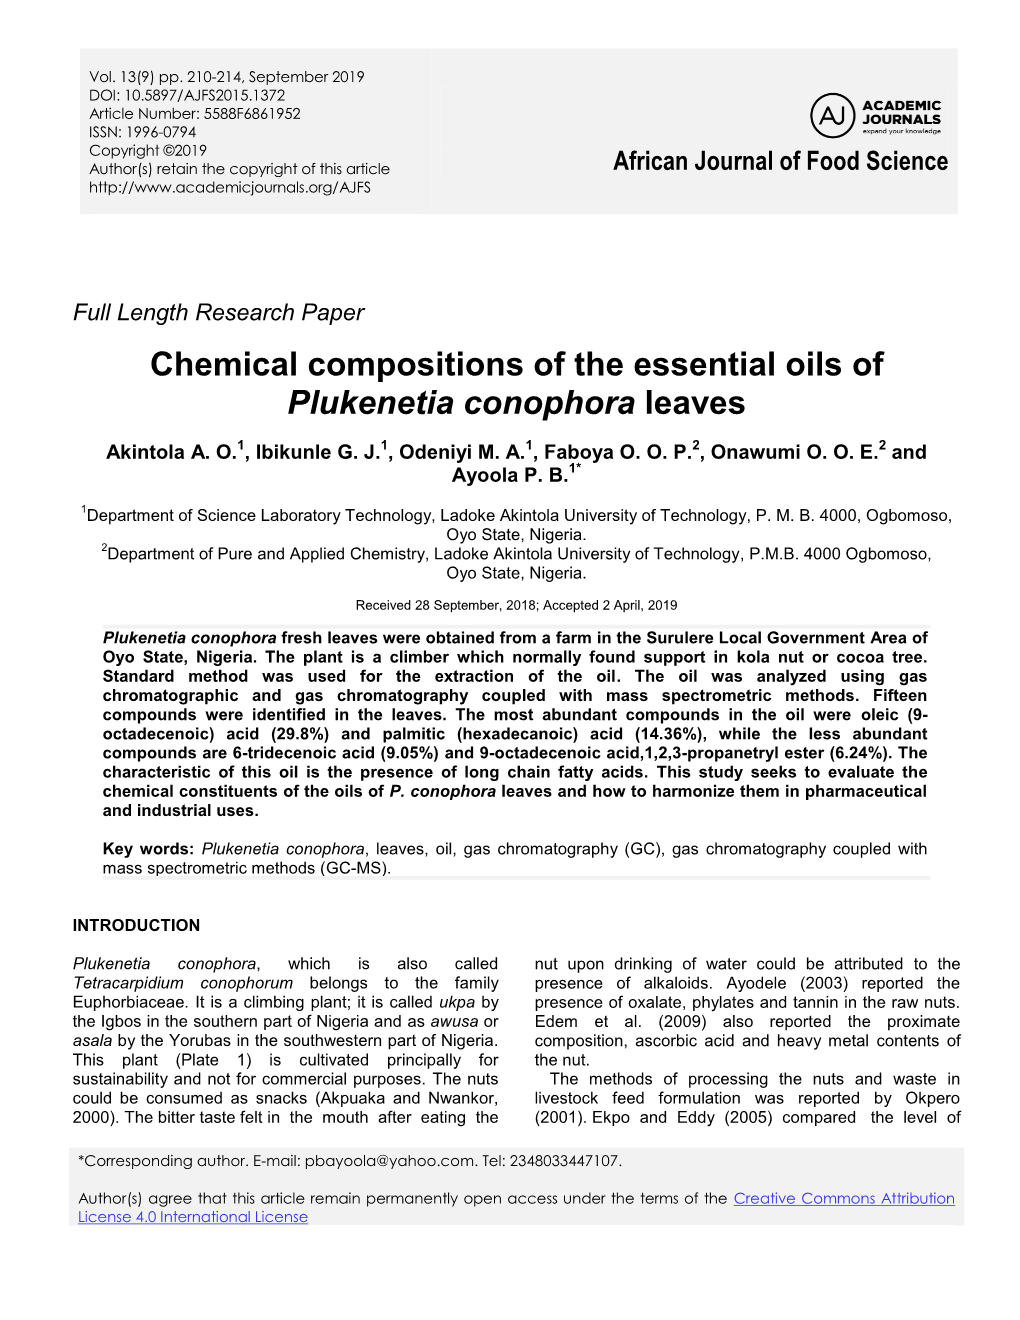 Chemical Compositions of the Essential Oils of Plukenetia Conophora Leaves